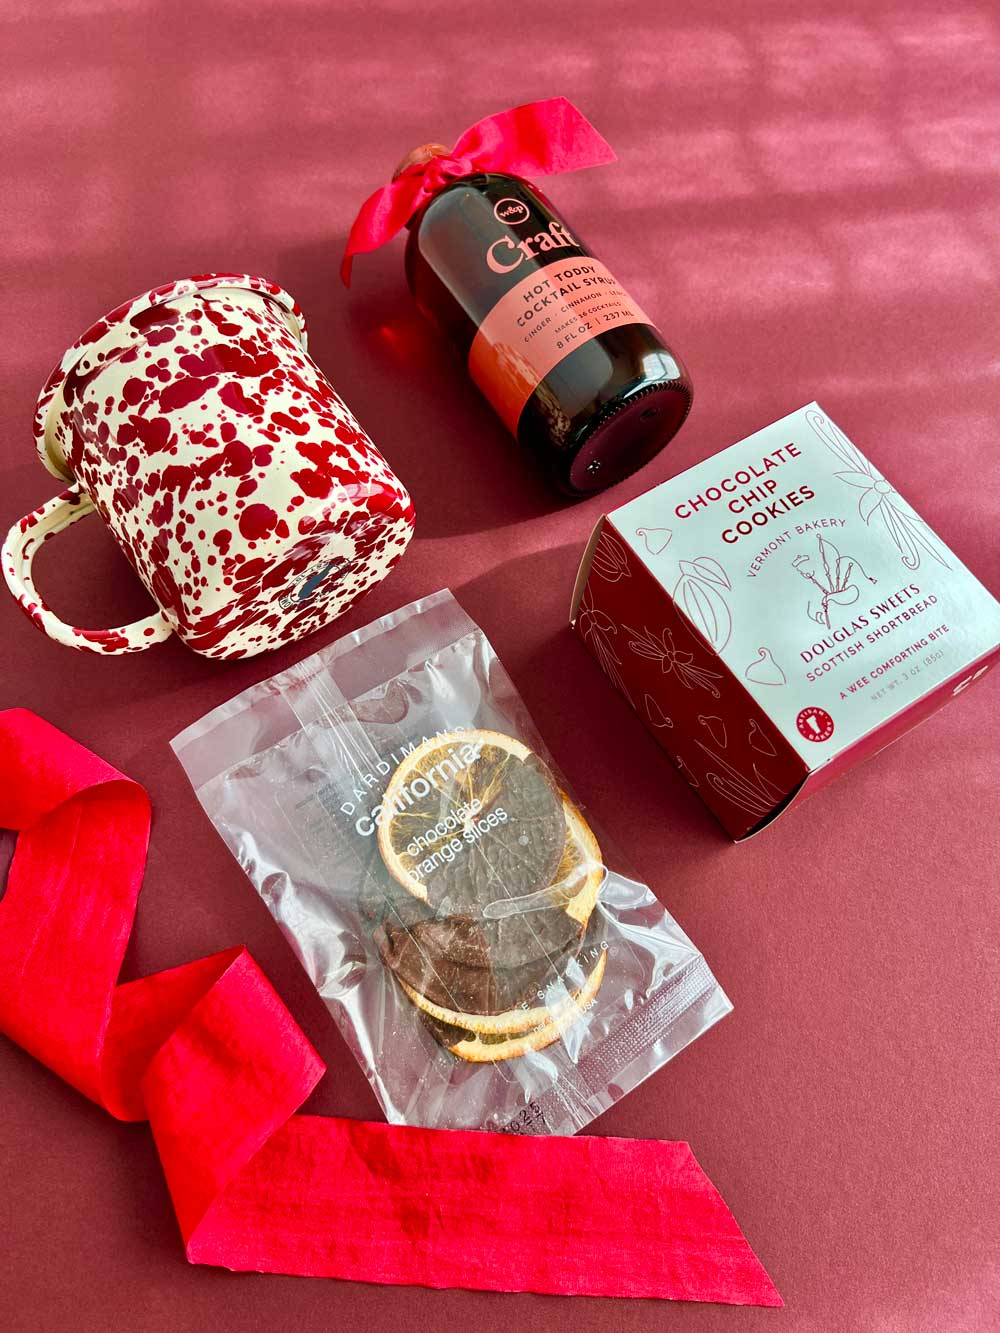 The Hot Toddy Gift Box